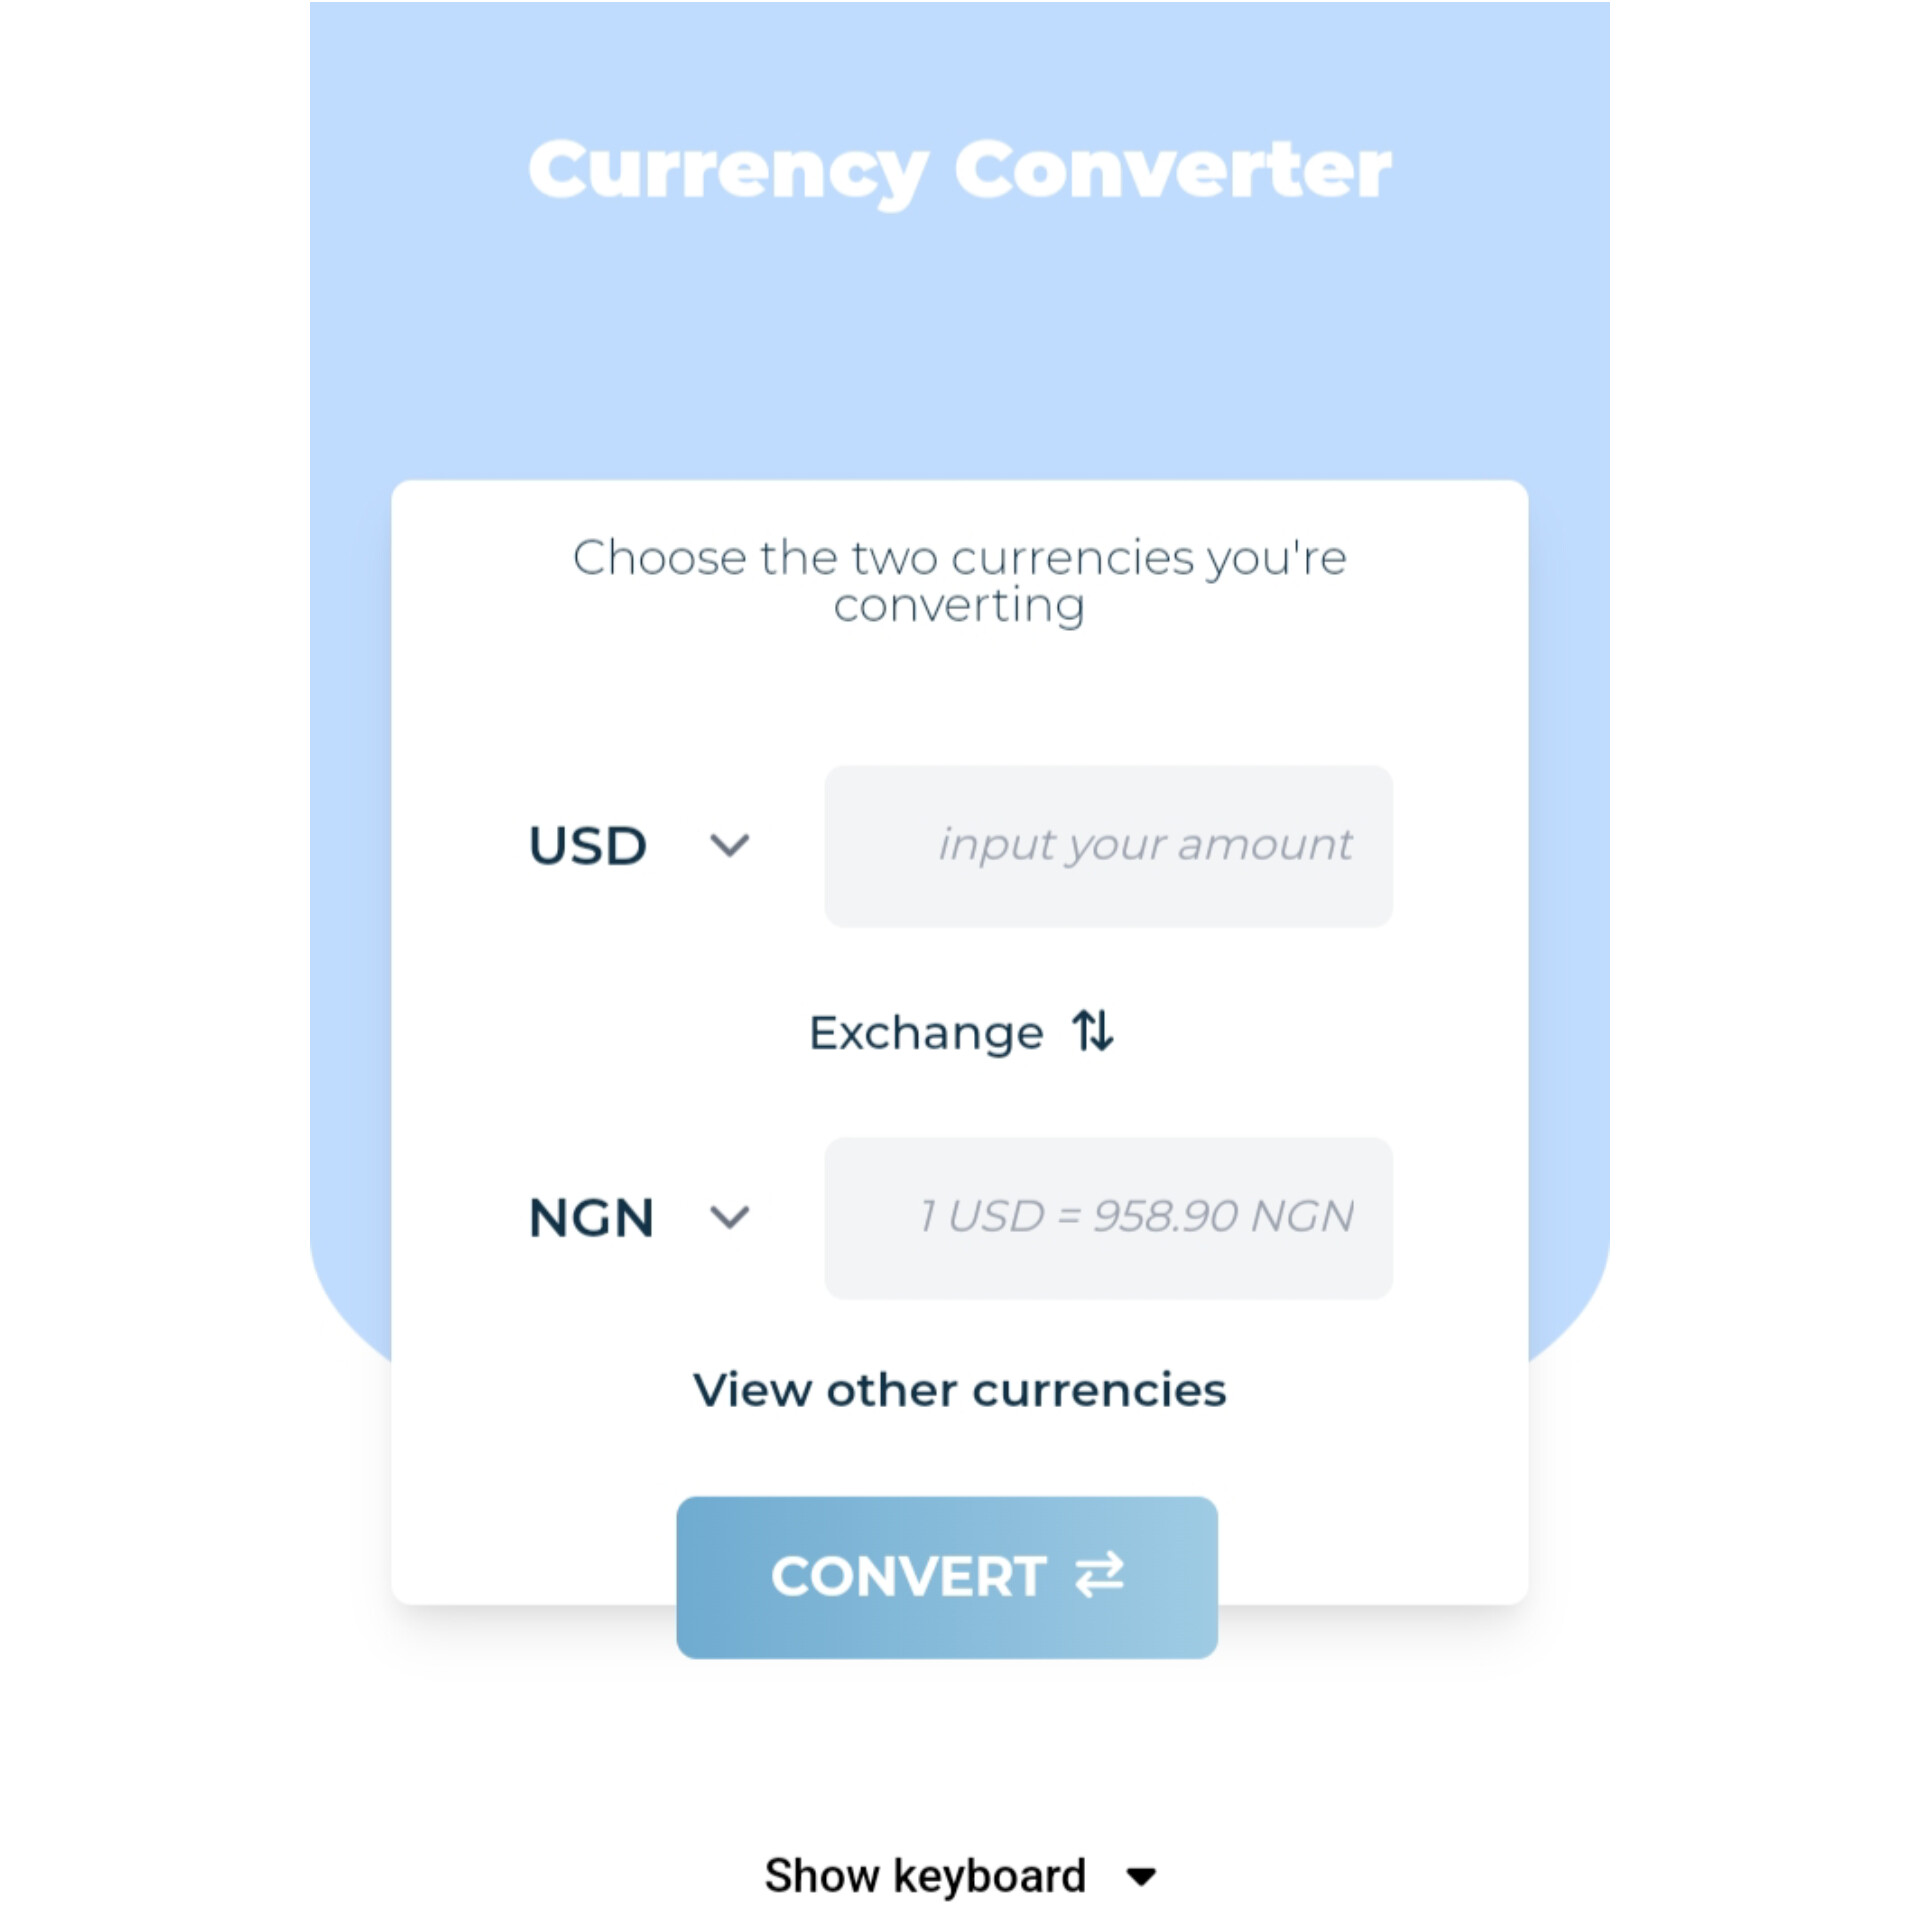 A example of a currency converter UI interface